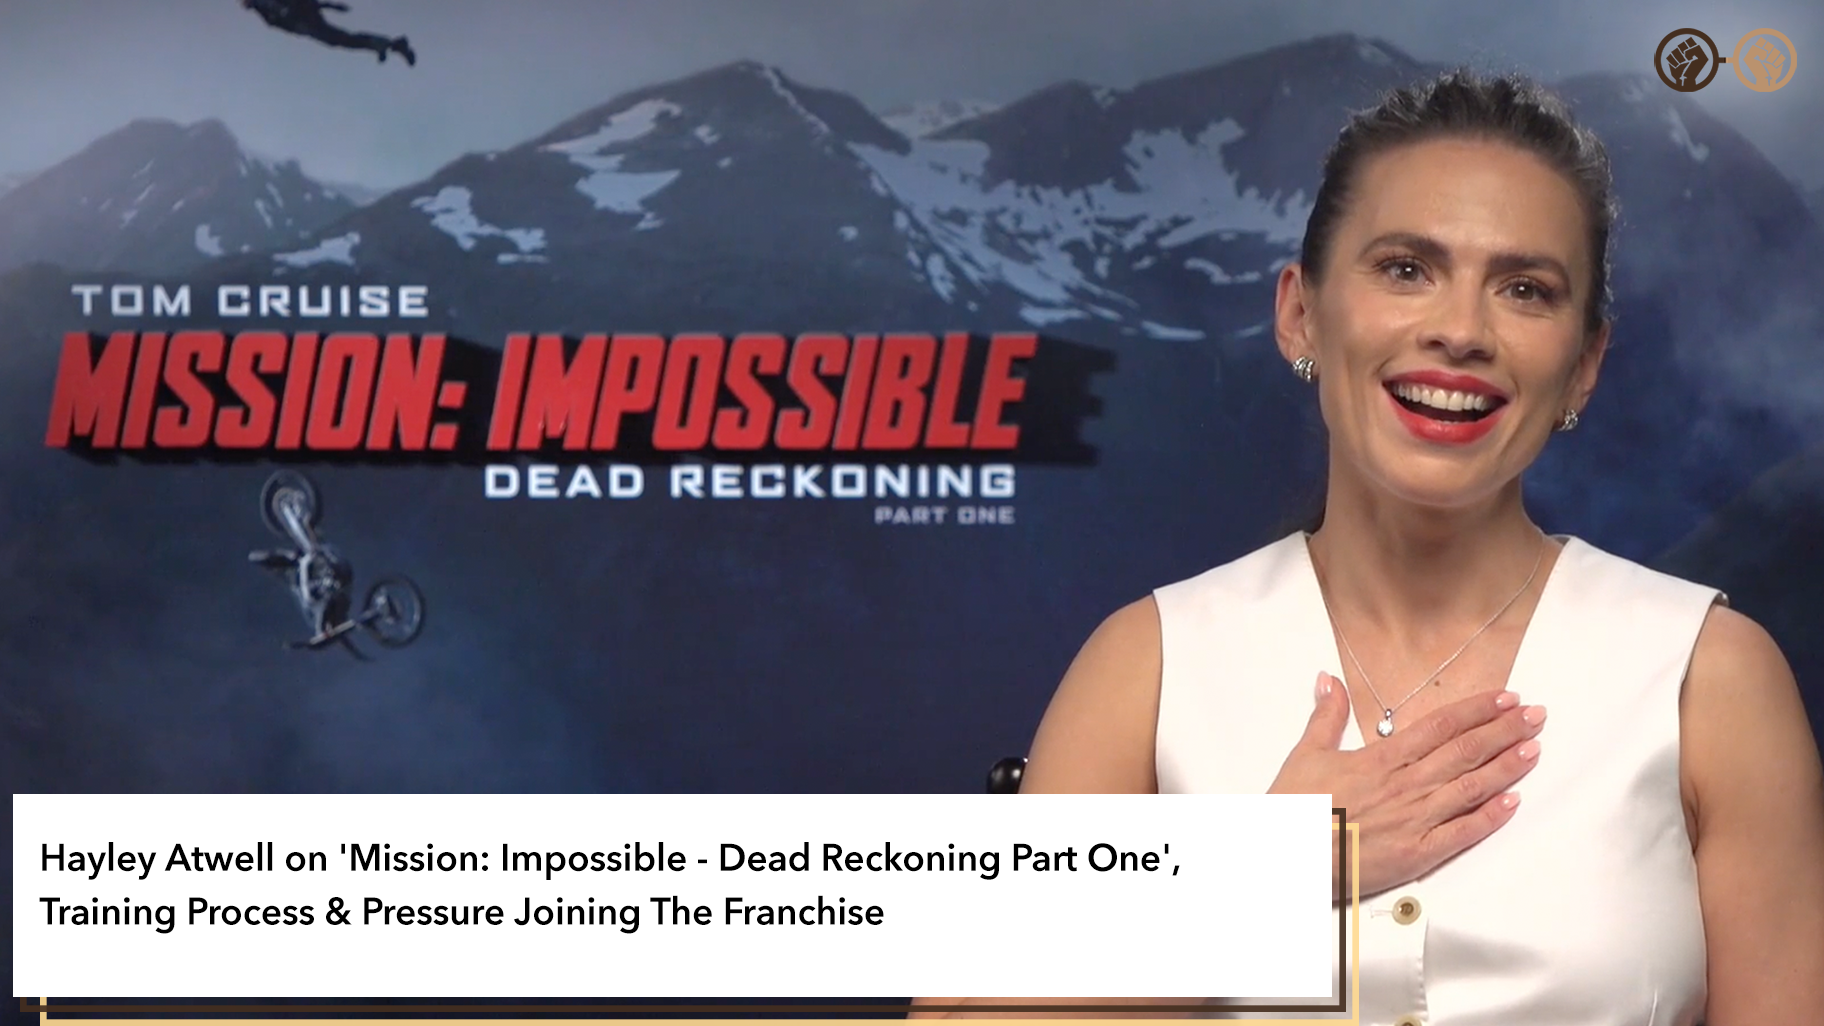 Hayley Atwell On ‘Mission: Impossible – Dead Reckoning Part One’, Training Process & Pressure Joining The Franchise – Interview